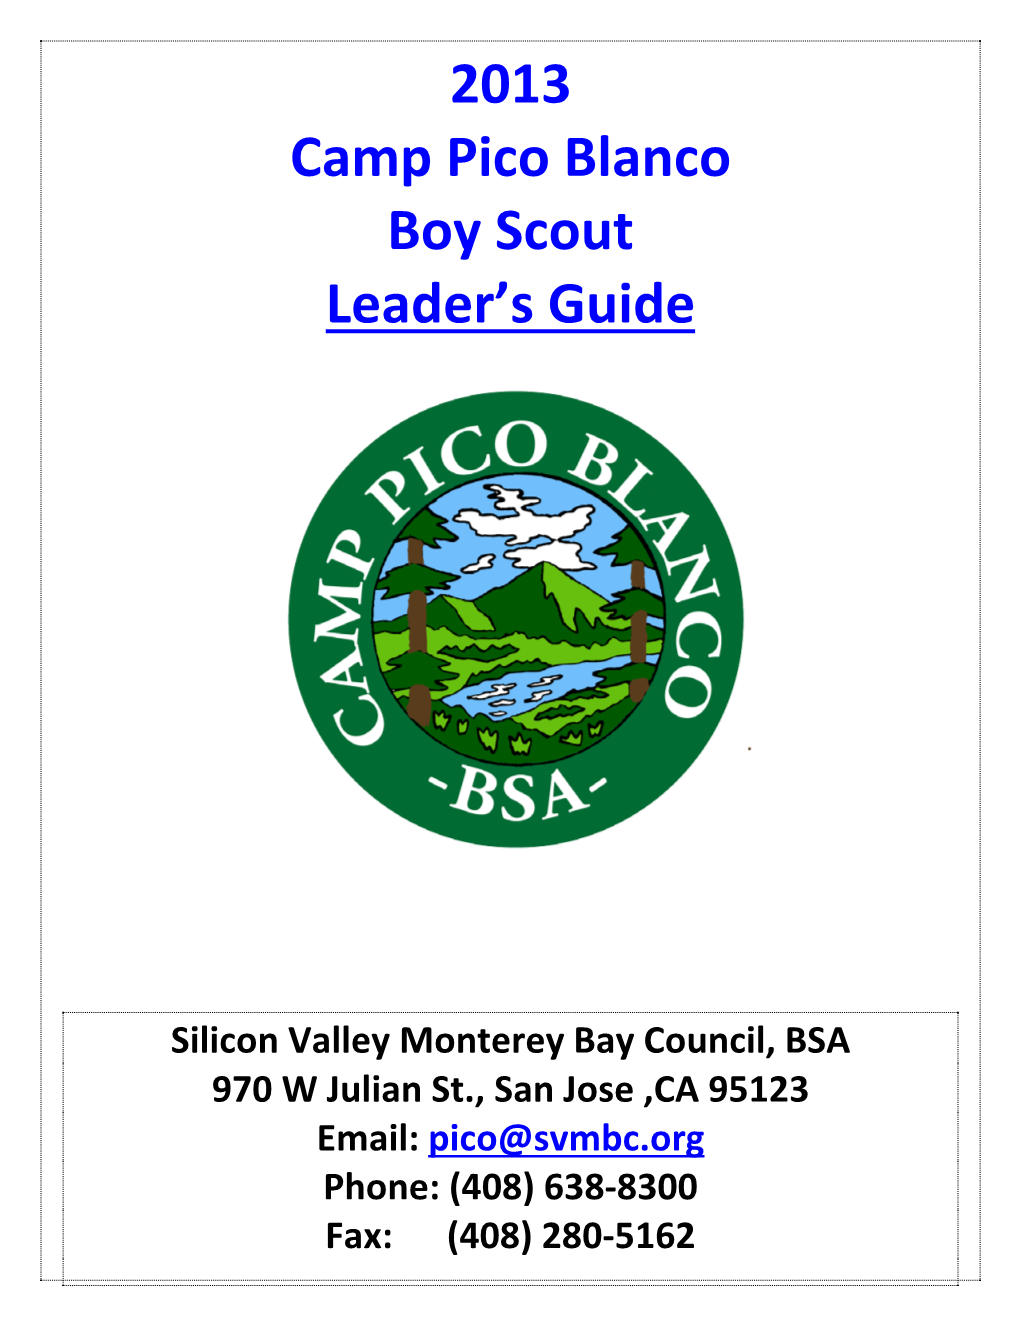 Pico Blanco Scout Reservation Emergency Procedures